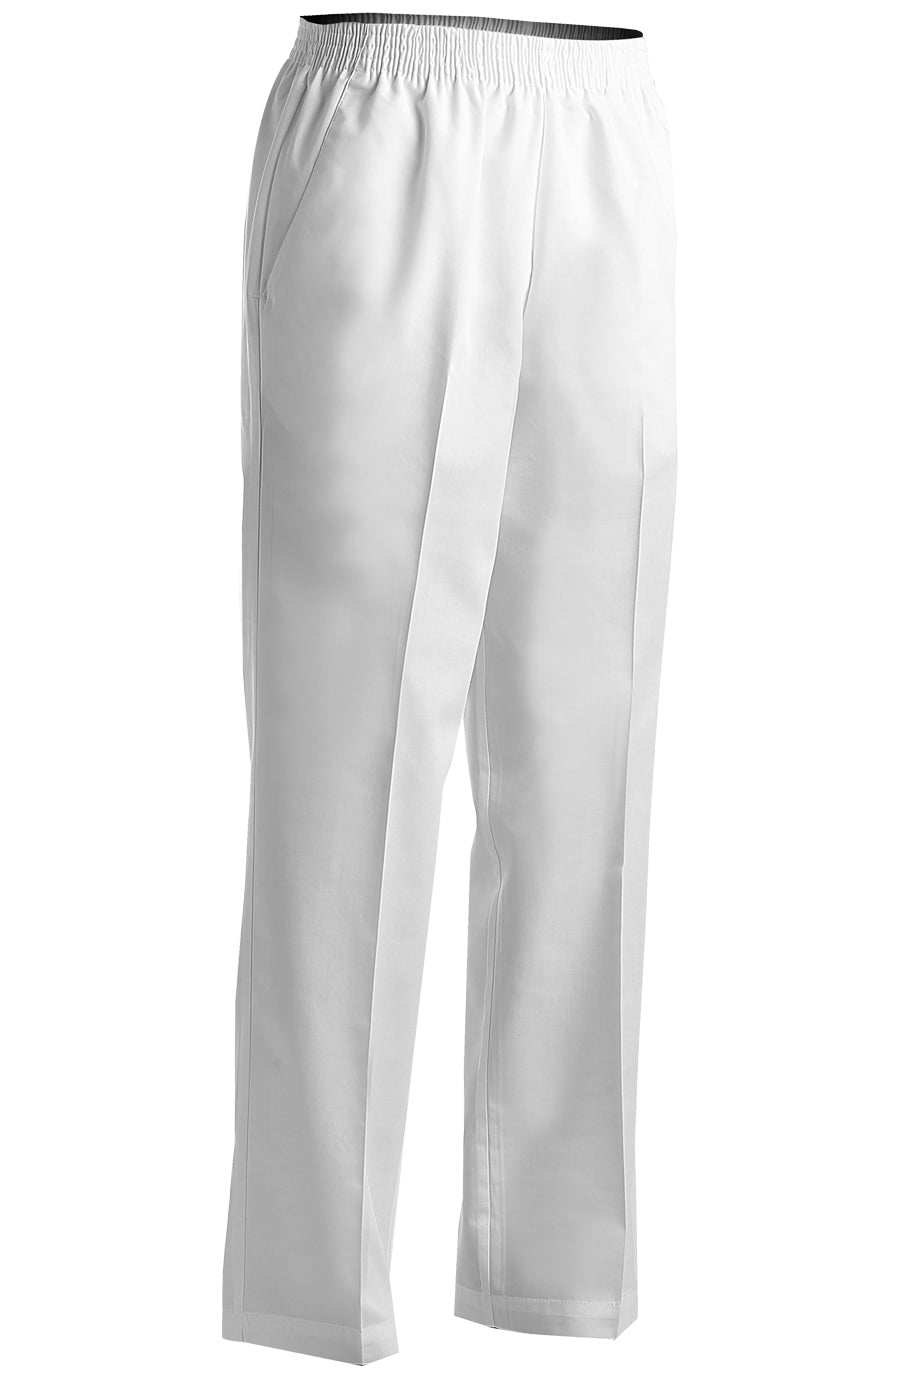 Cotton Blend Pull On Pant